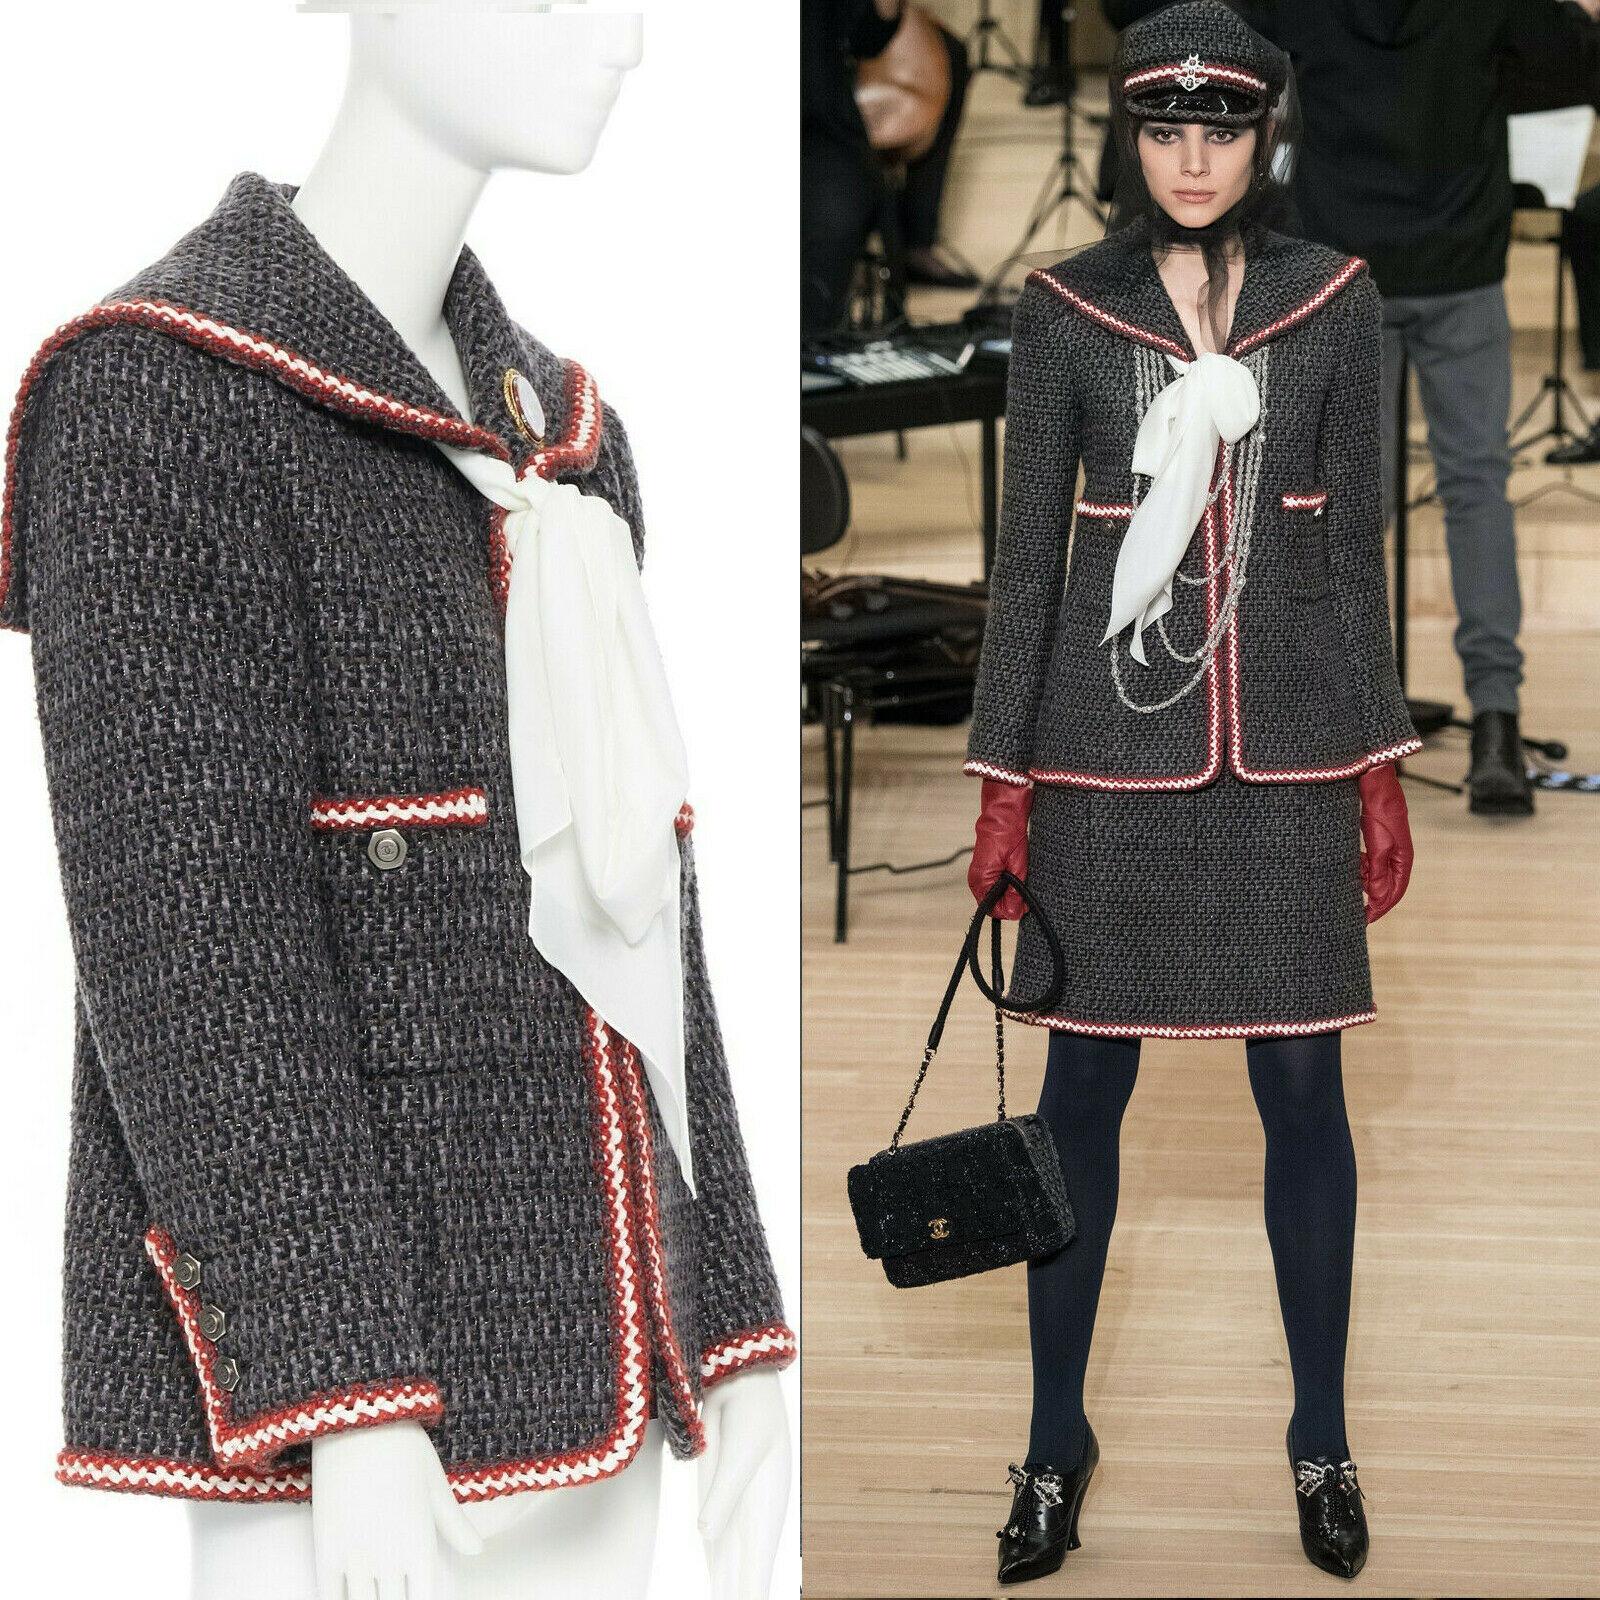 runway CHANEL 18A Paris-Hamburg grey fantasy tweed sailor collar jacket FR46
Brand: CHANEL
Designer: Karl Lagerfeld
Collection: 18A
Model Name / Style: Tweed jacket
Material: Acrylic and cotton
Color: Grey
Pattern: Solid
Closure: Button
Lining